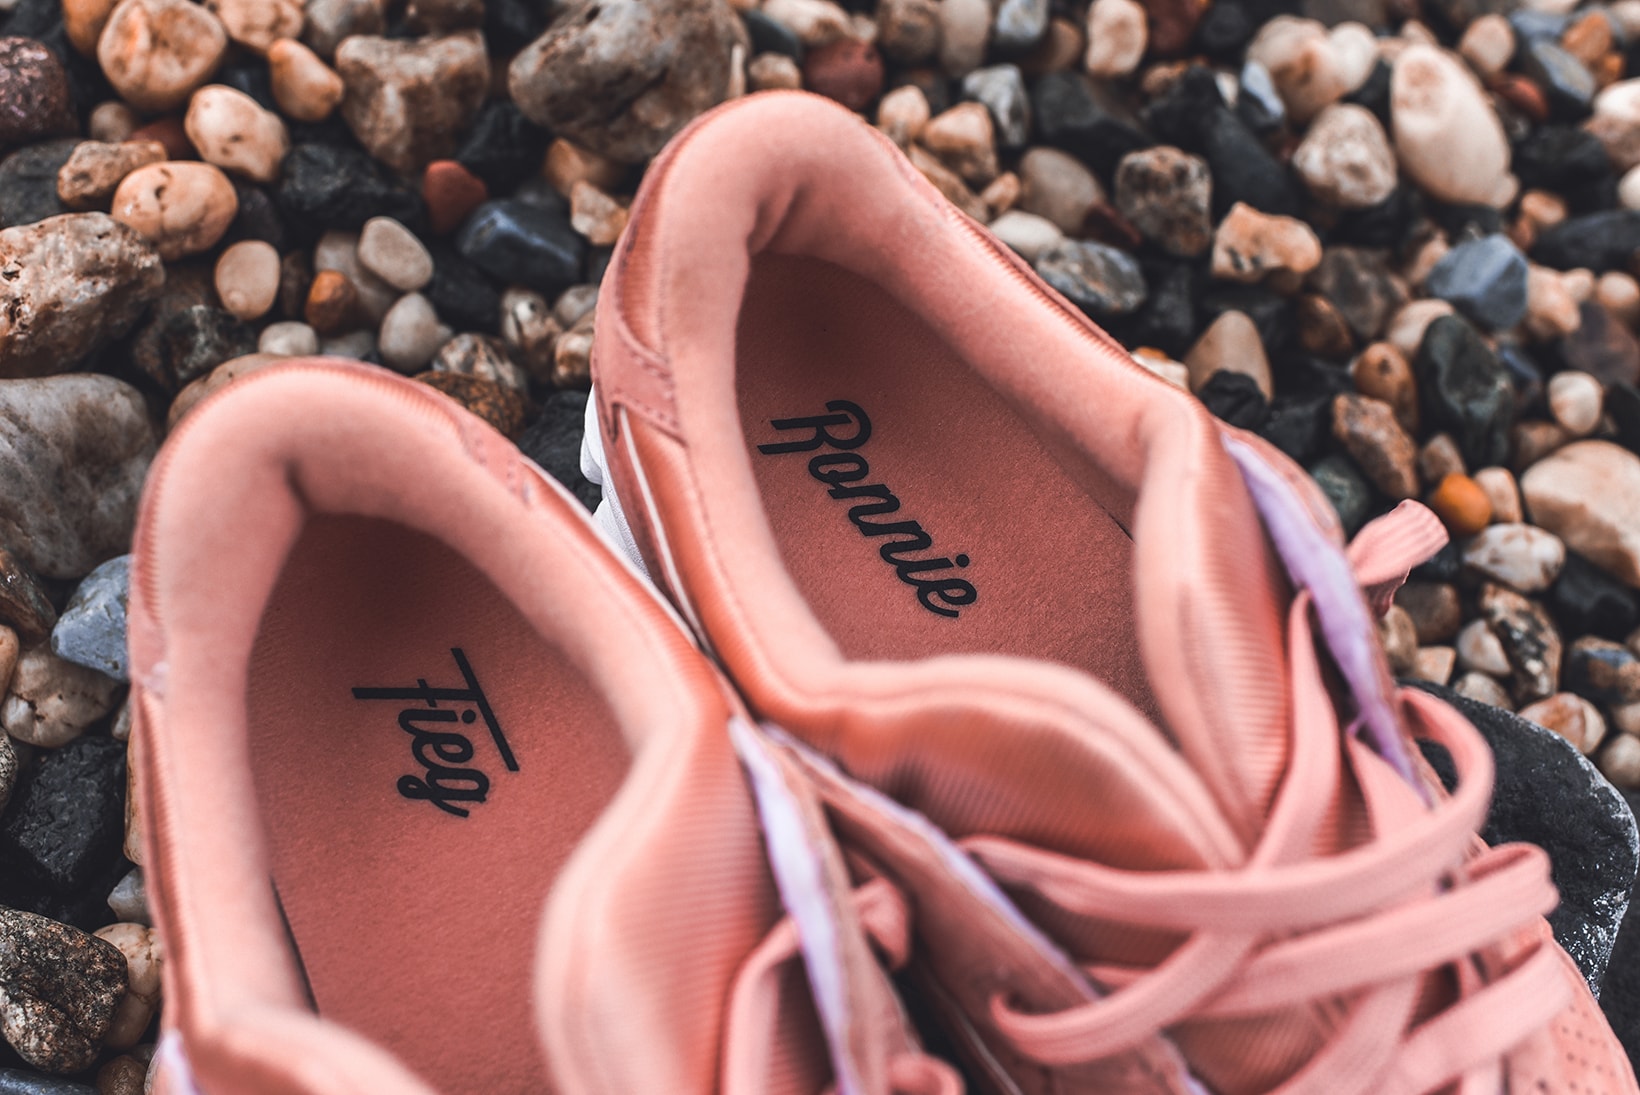 KITH Reveals Legends Day Collaboration Ronnie Fieg ASICS